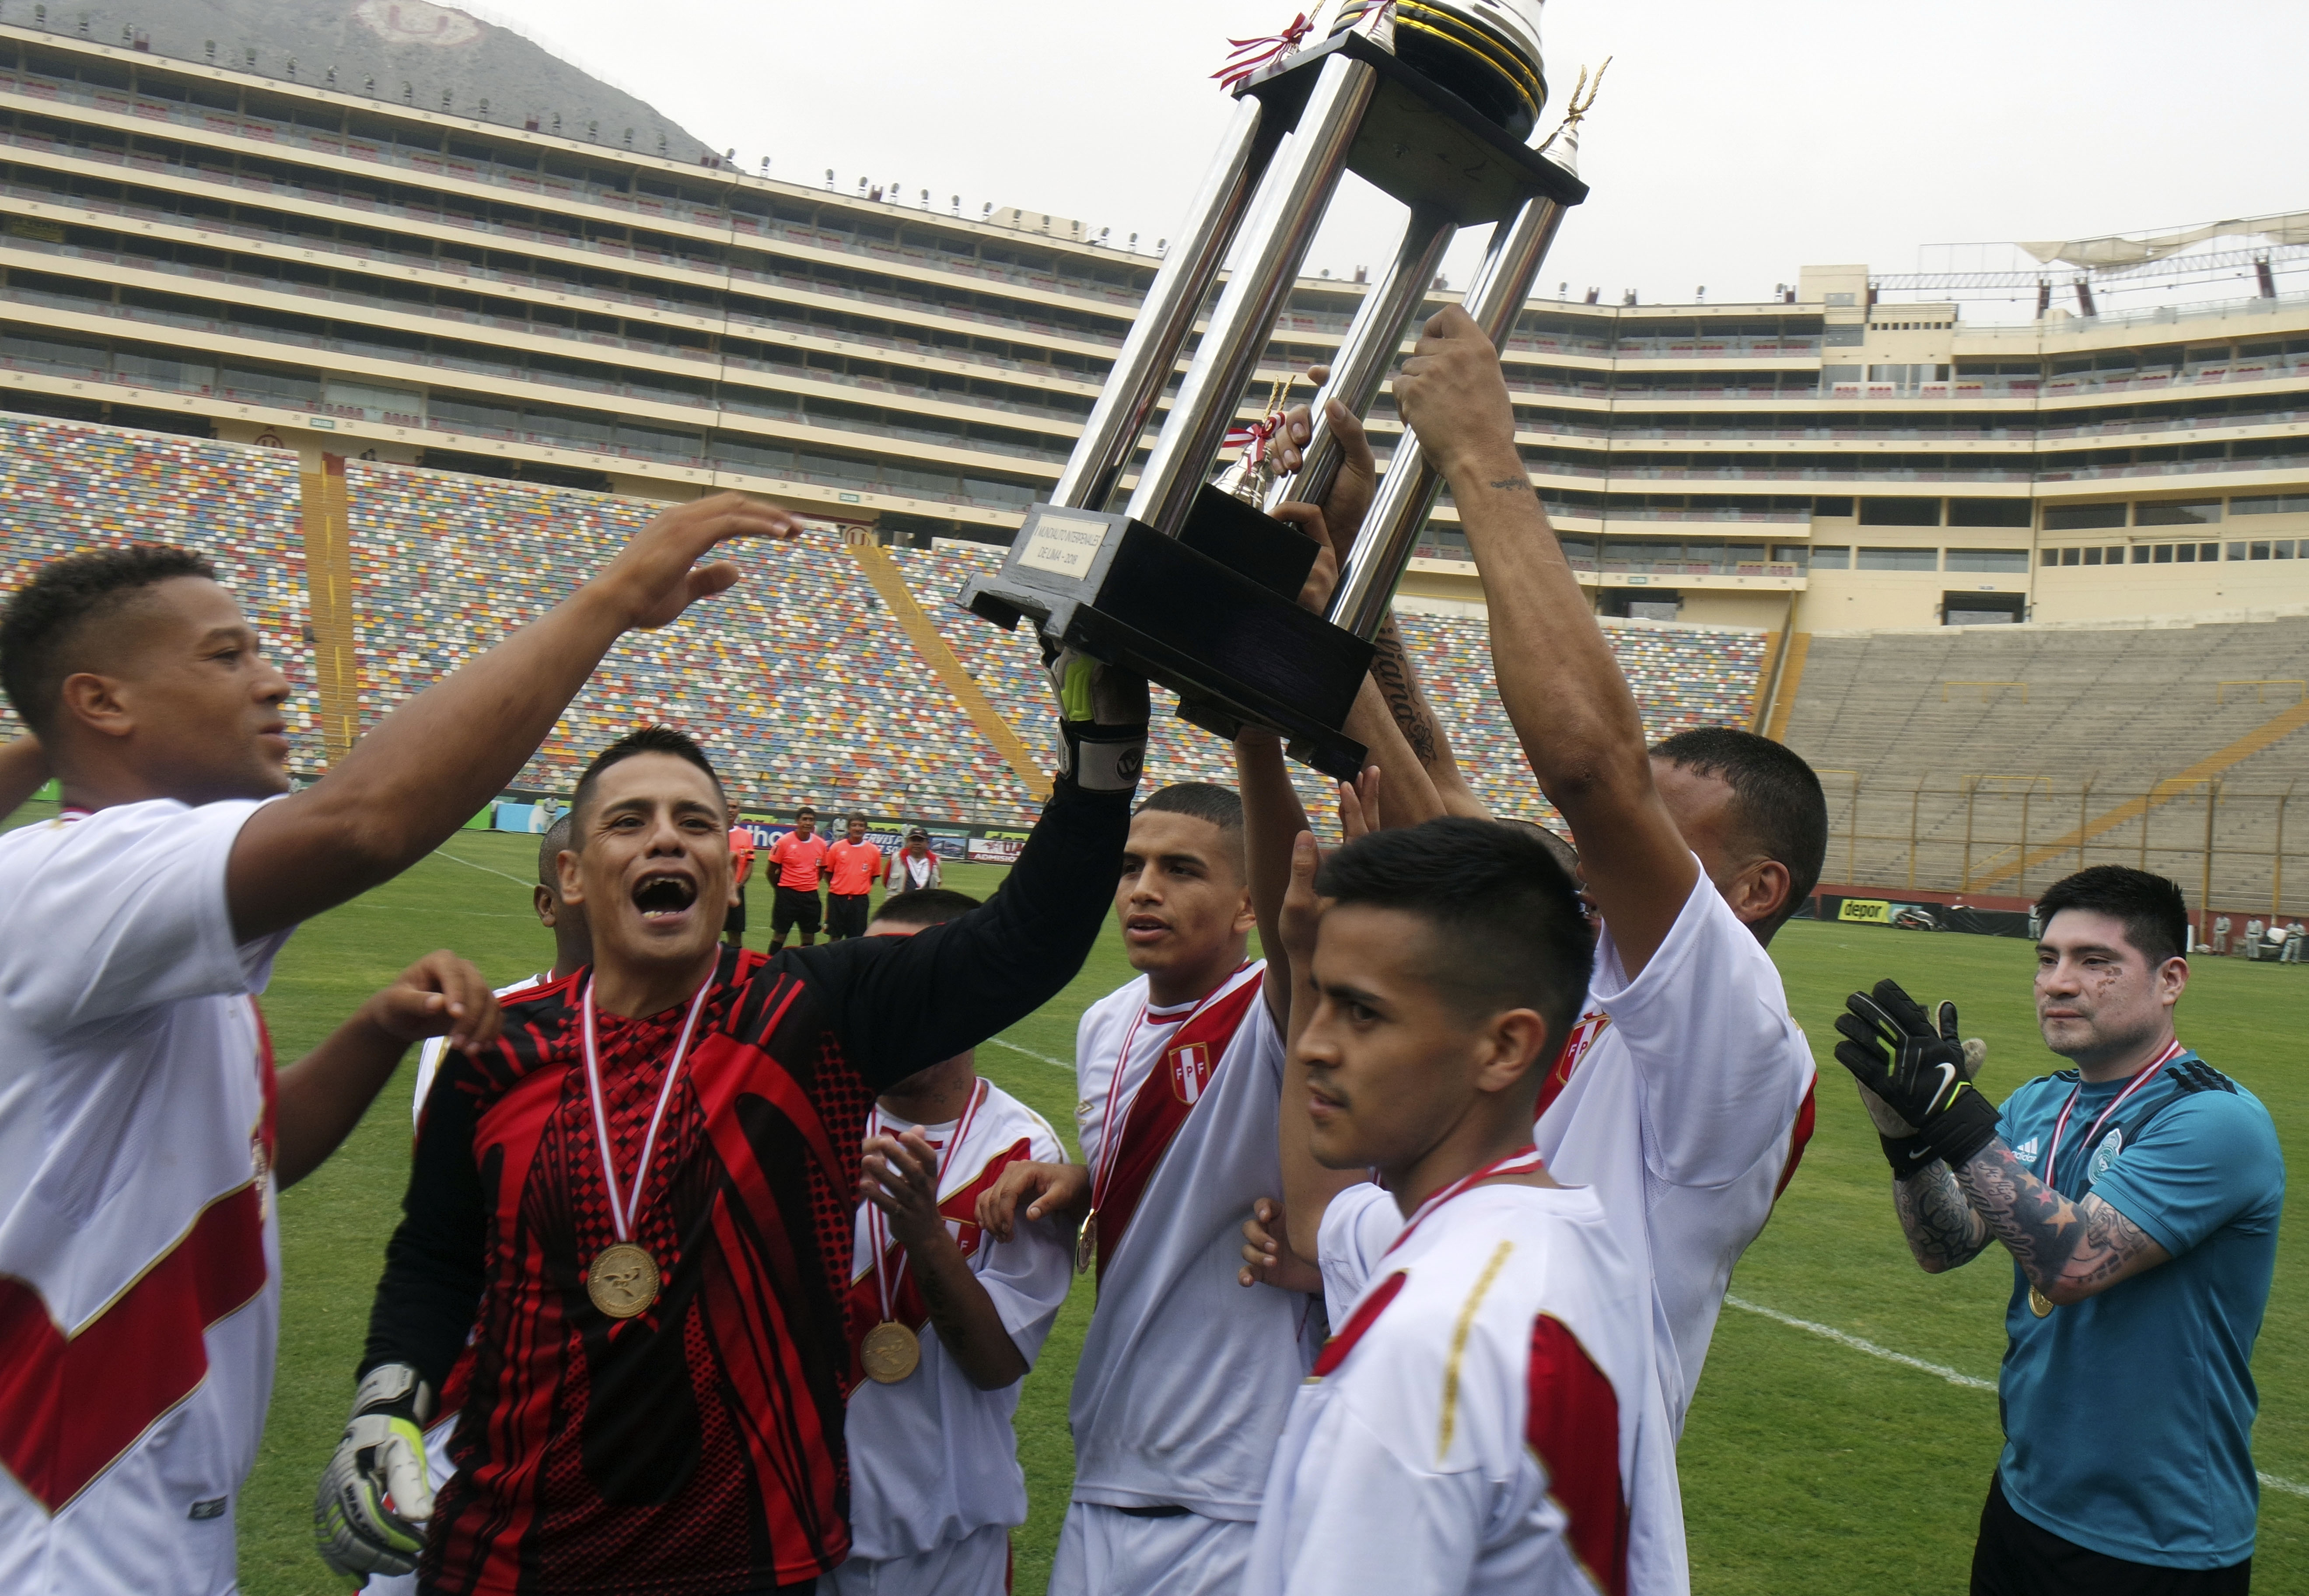 Peru gets out of jail to win prisoners 'World Cup'